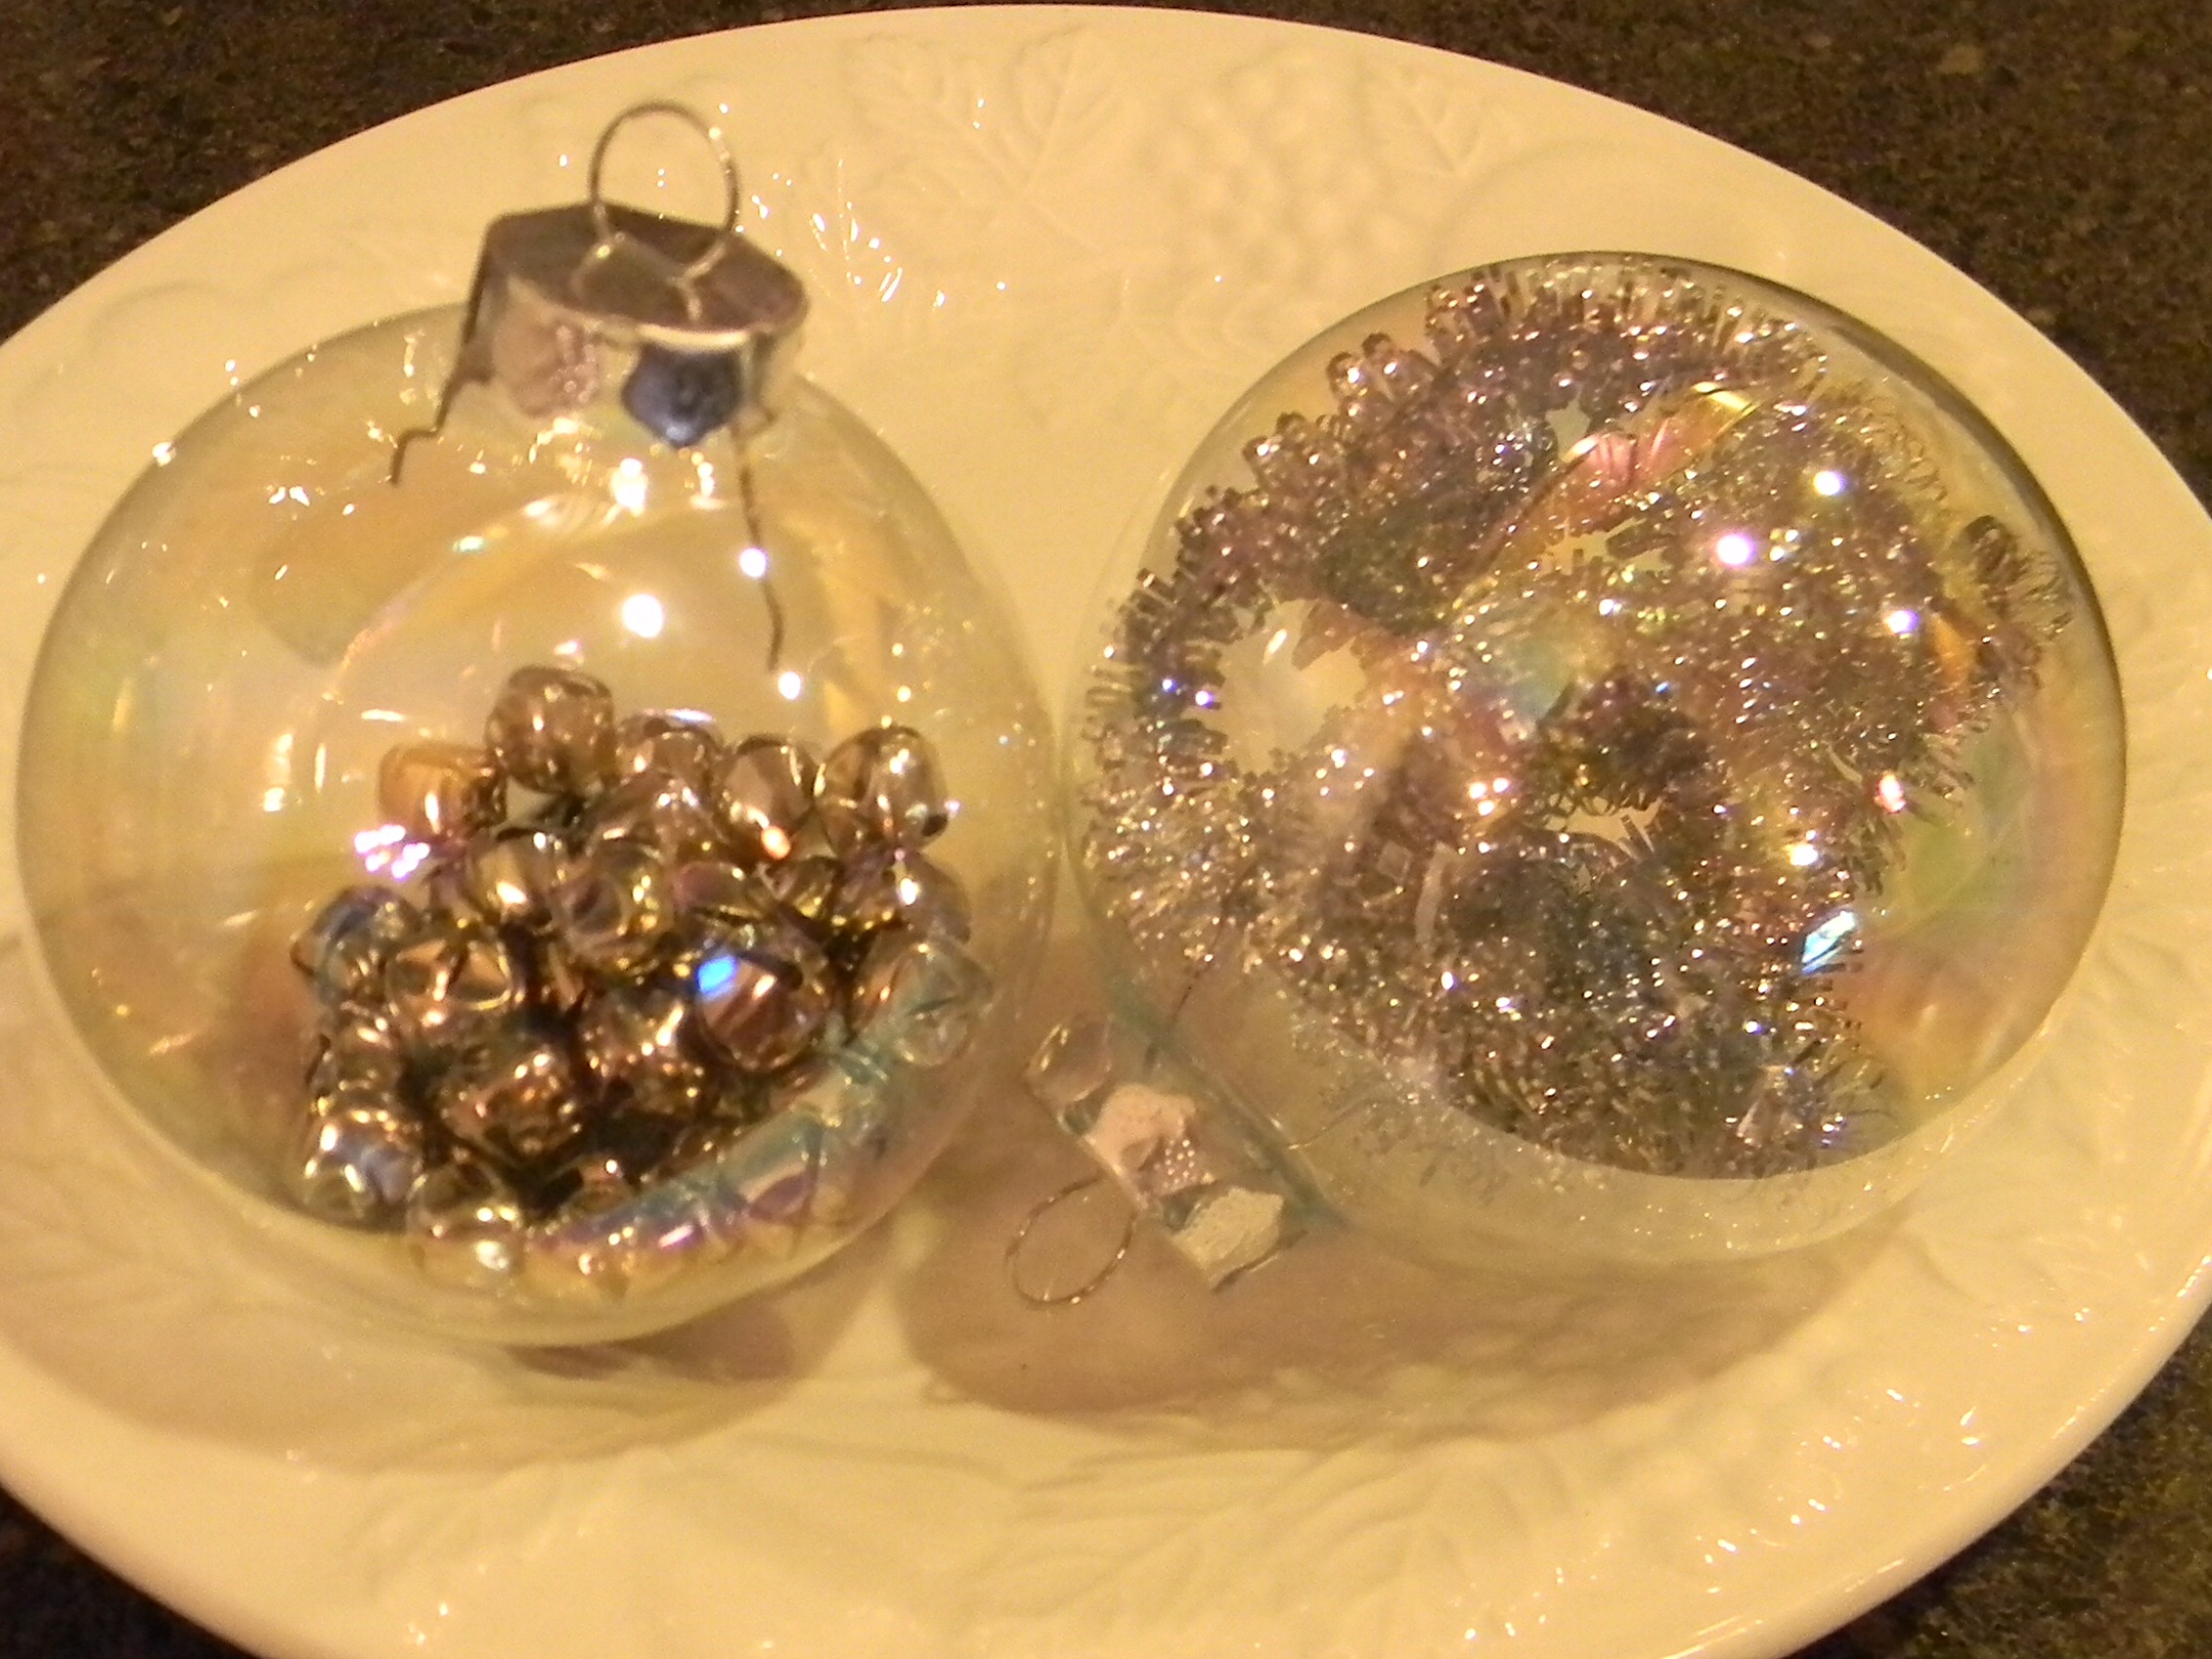 This Item Comes with 4 Ornaments per Unit. Vickerman 4.75 Clear Ball Christmas Ornament with Gunmetal Glitter Interior